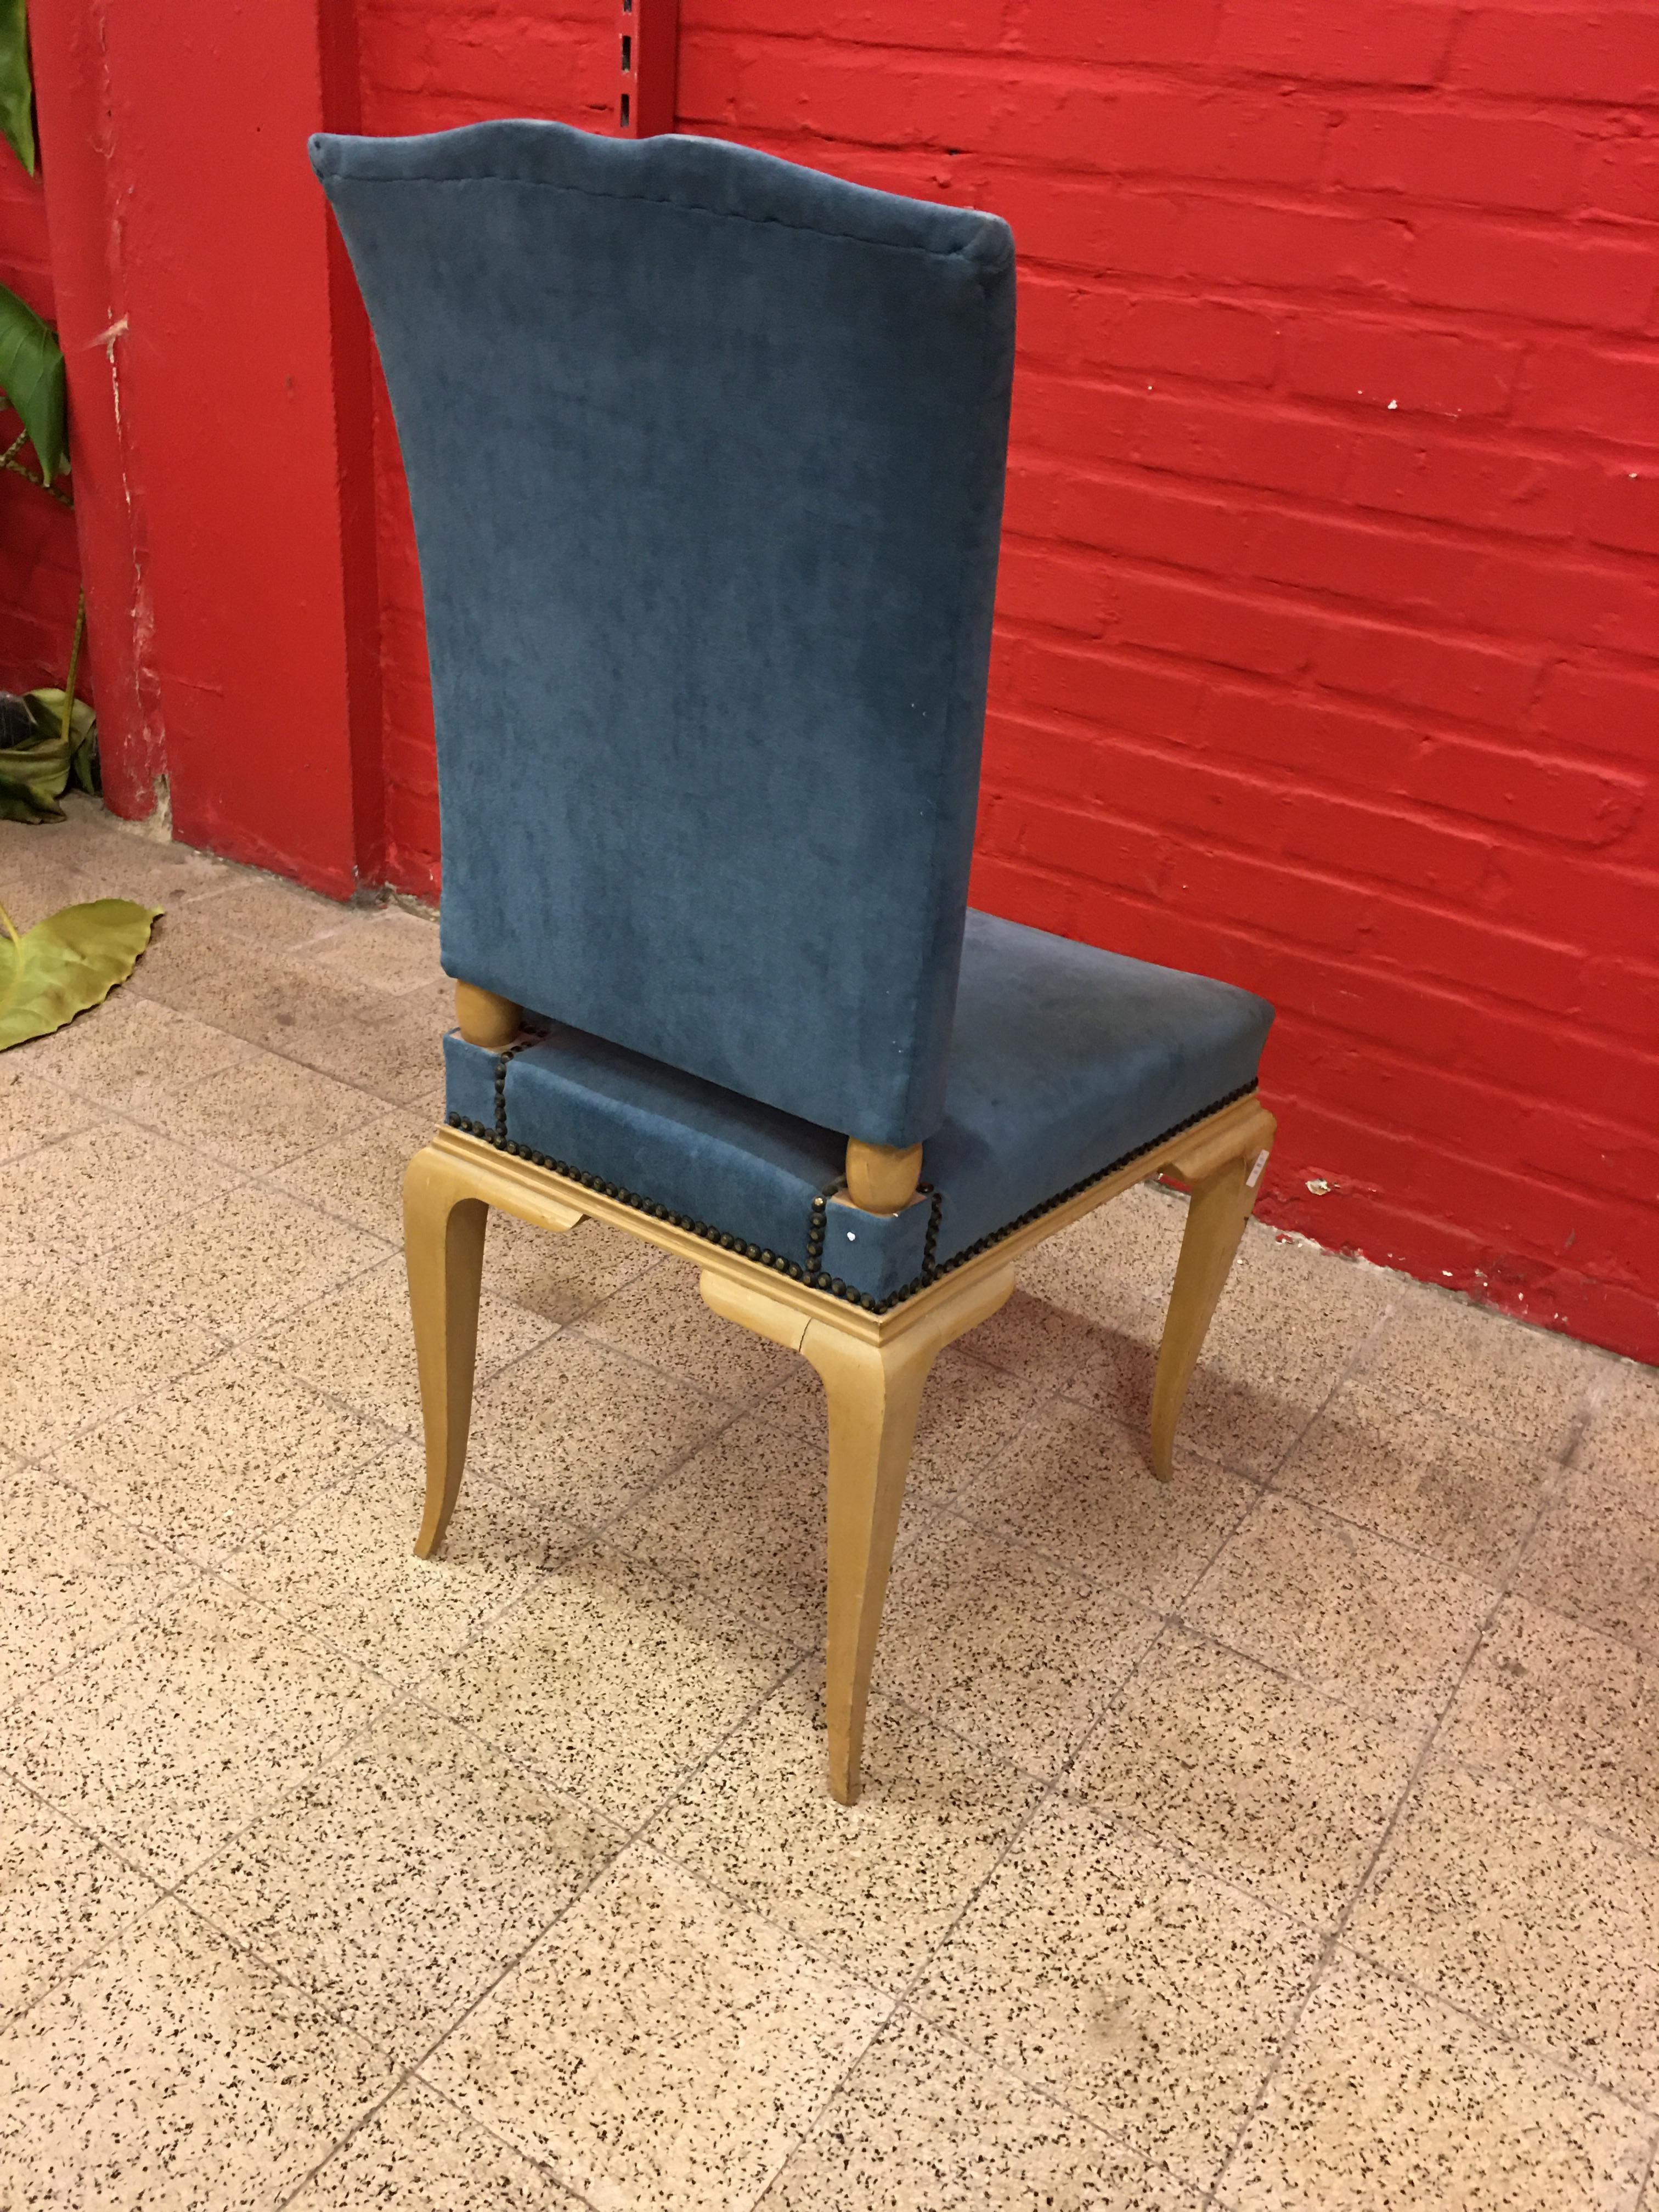 René Prou, Art Deco Chair in Lacquered Wood and Blue Velvet, circa 1940-1950 For Sale 5